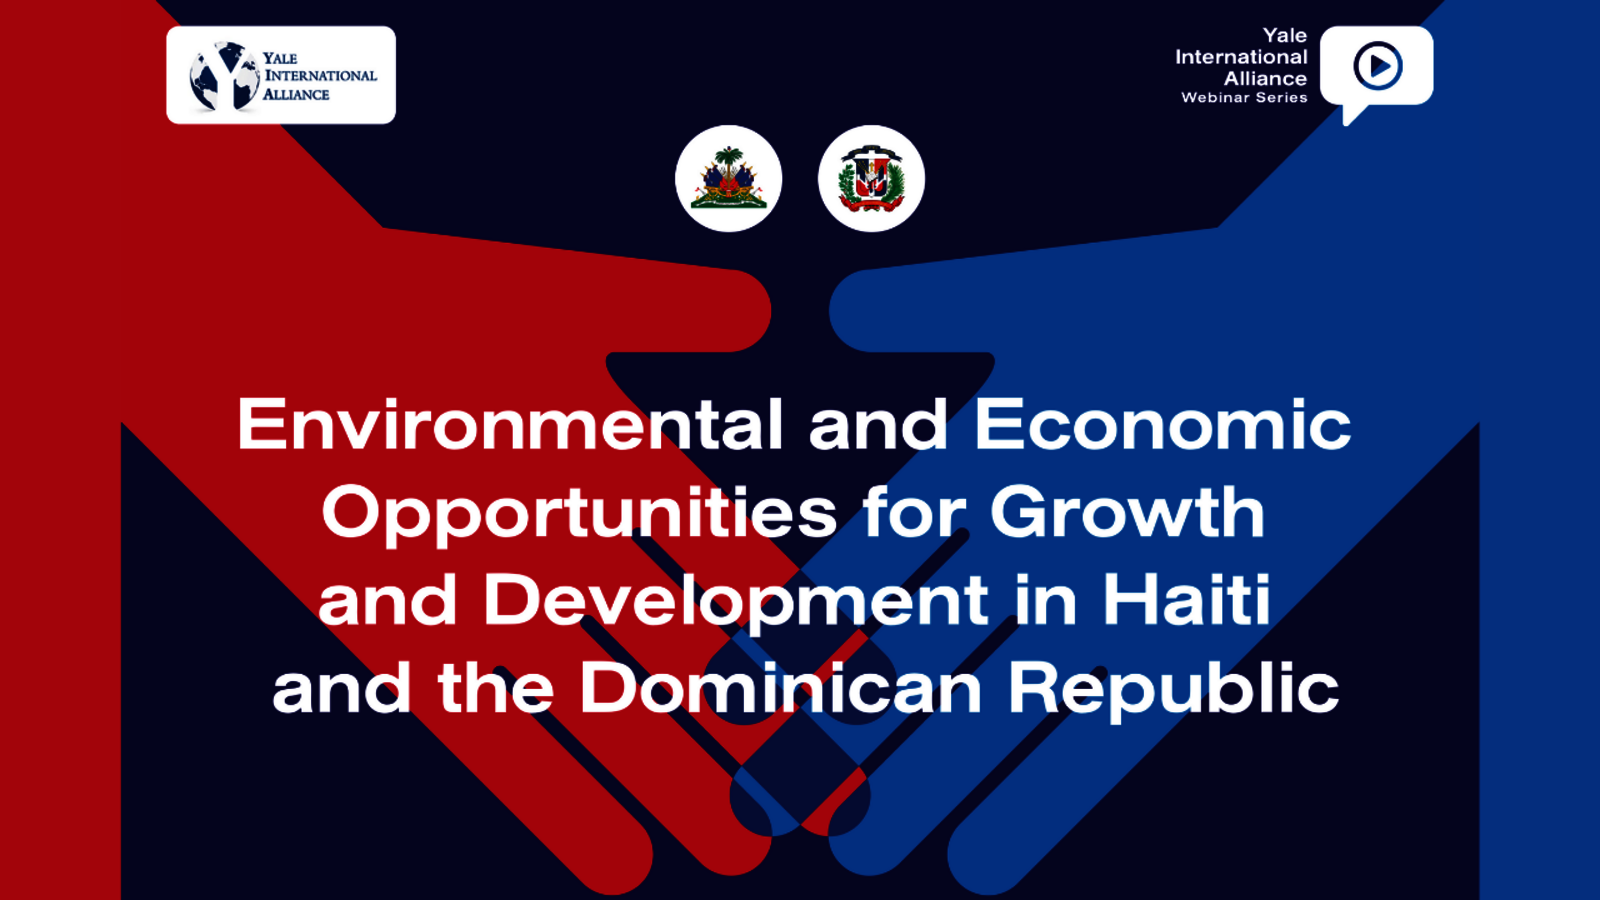 Environmental and Economic Opportunities for Growth and Development in Haiti and the Dominican Republic